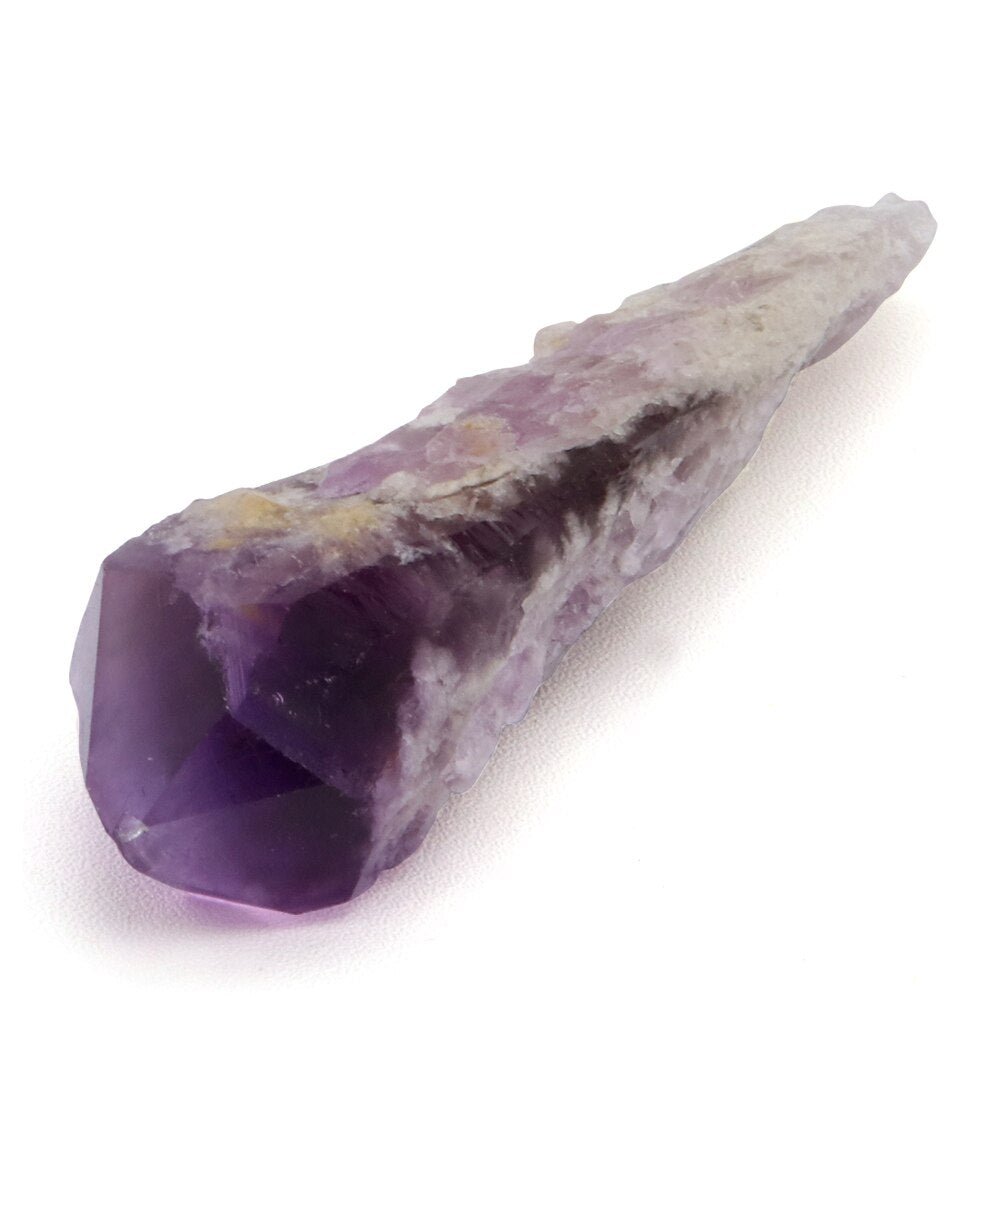 Healing and Purifying Smudge Kit with Amethyst - Spiritual Practice